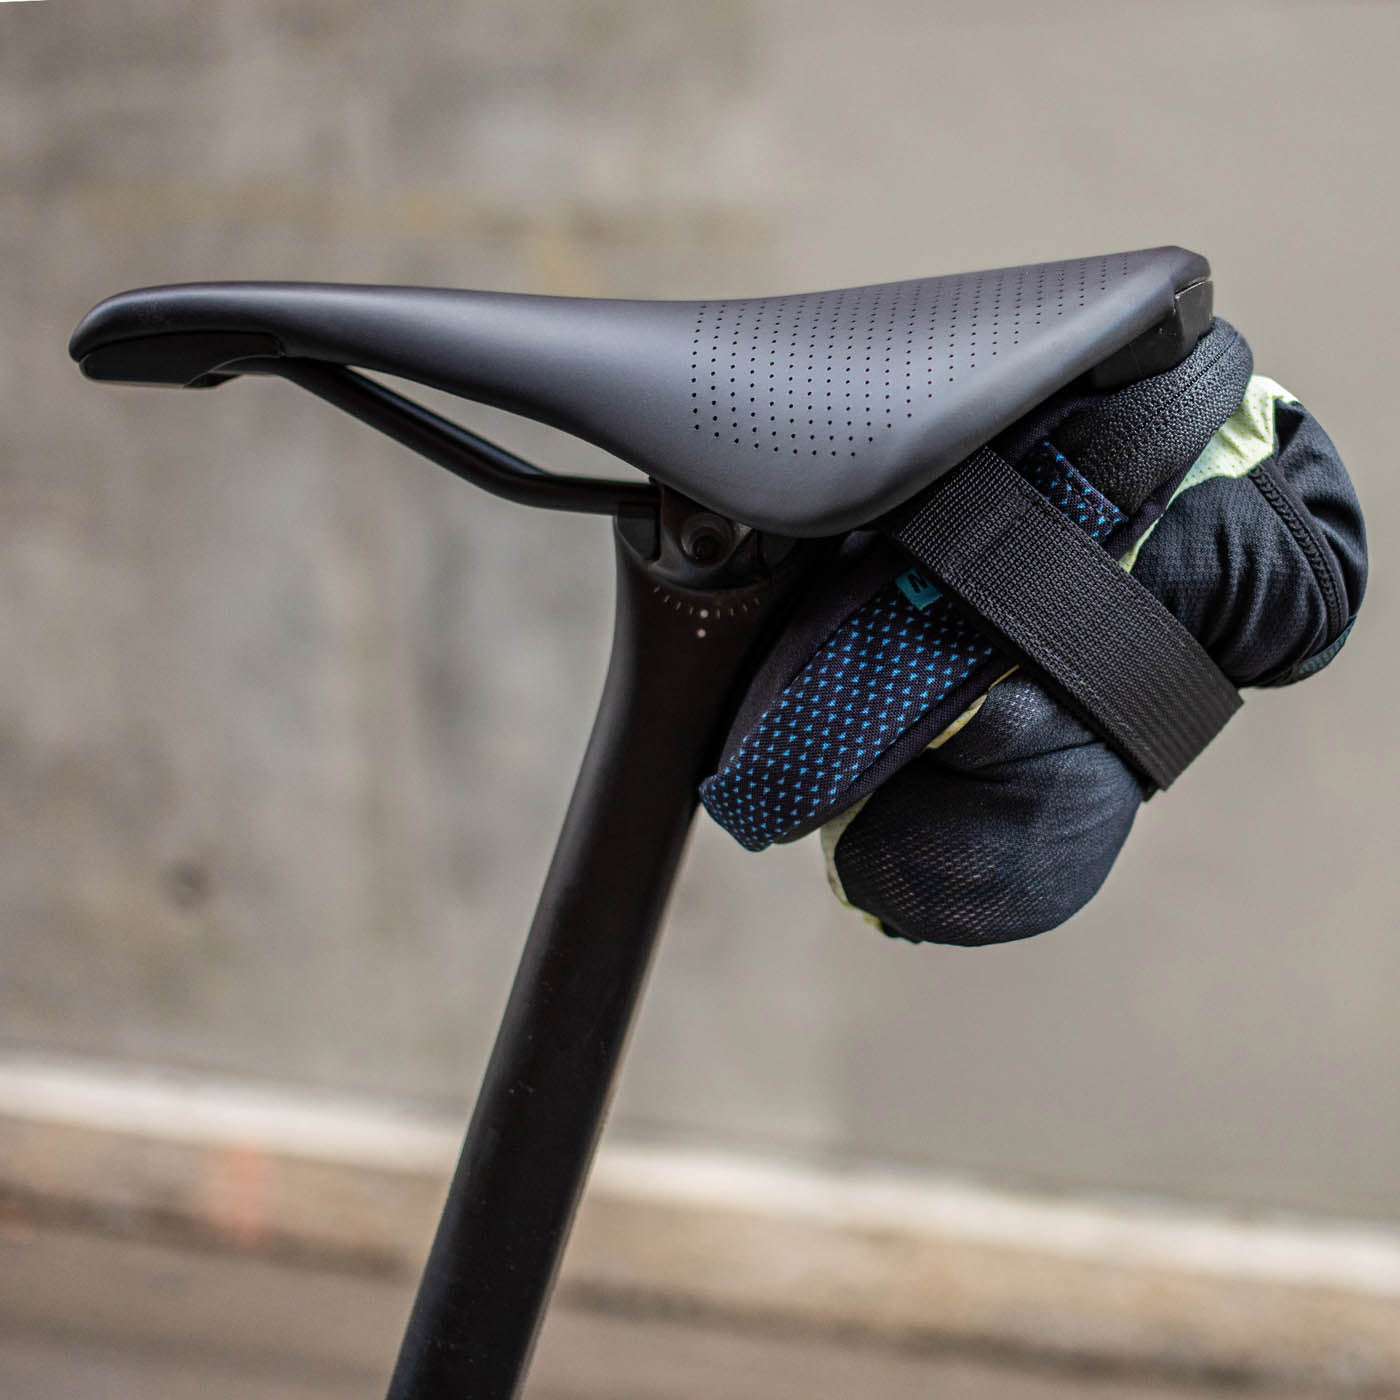 best seat bags for bikes